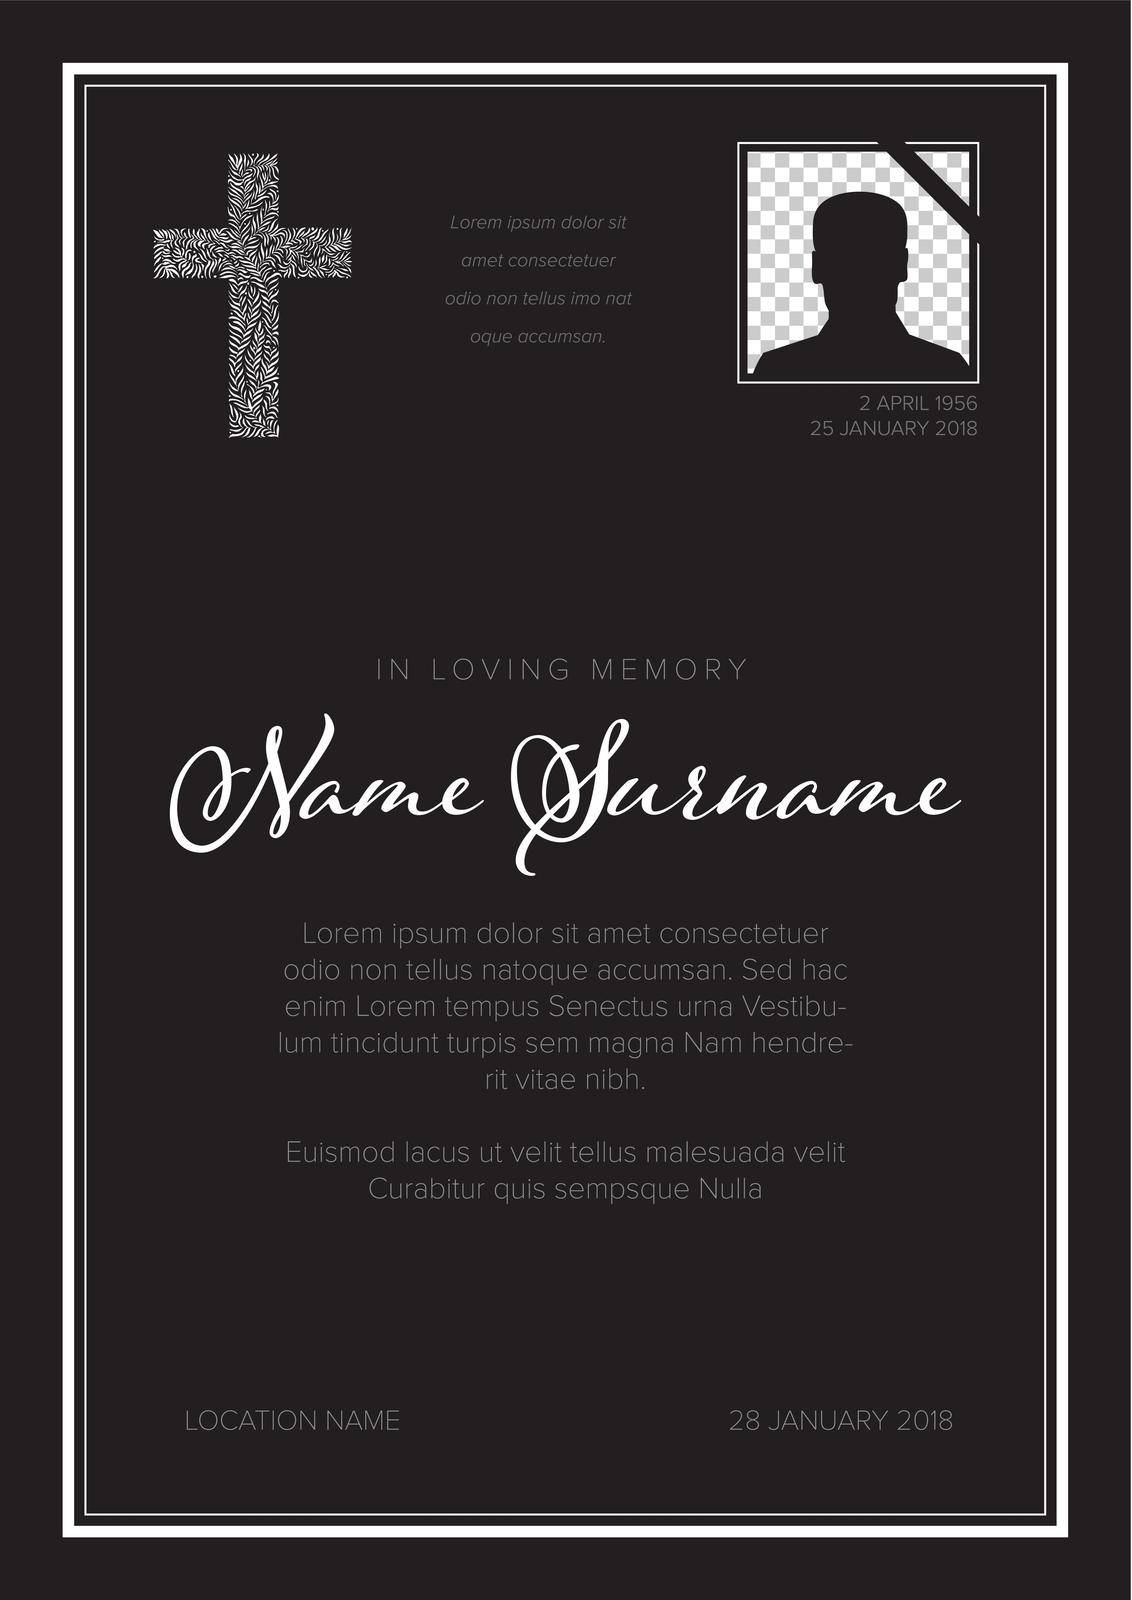 Black Funeral death notice card template by orson